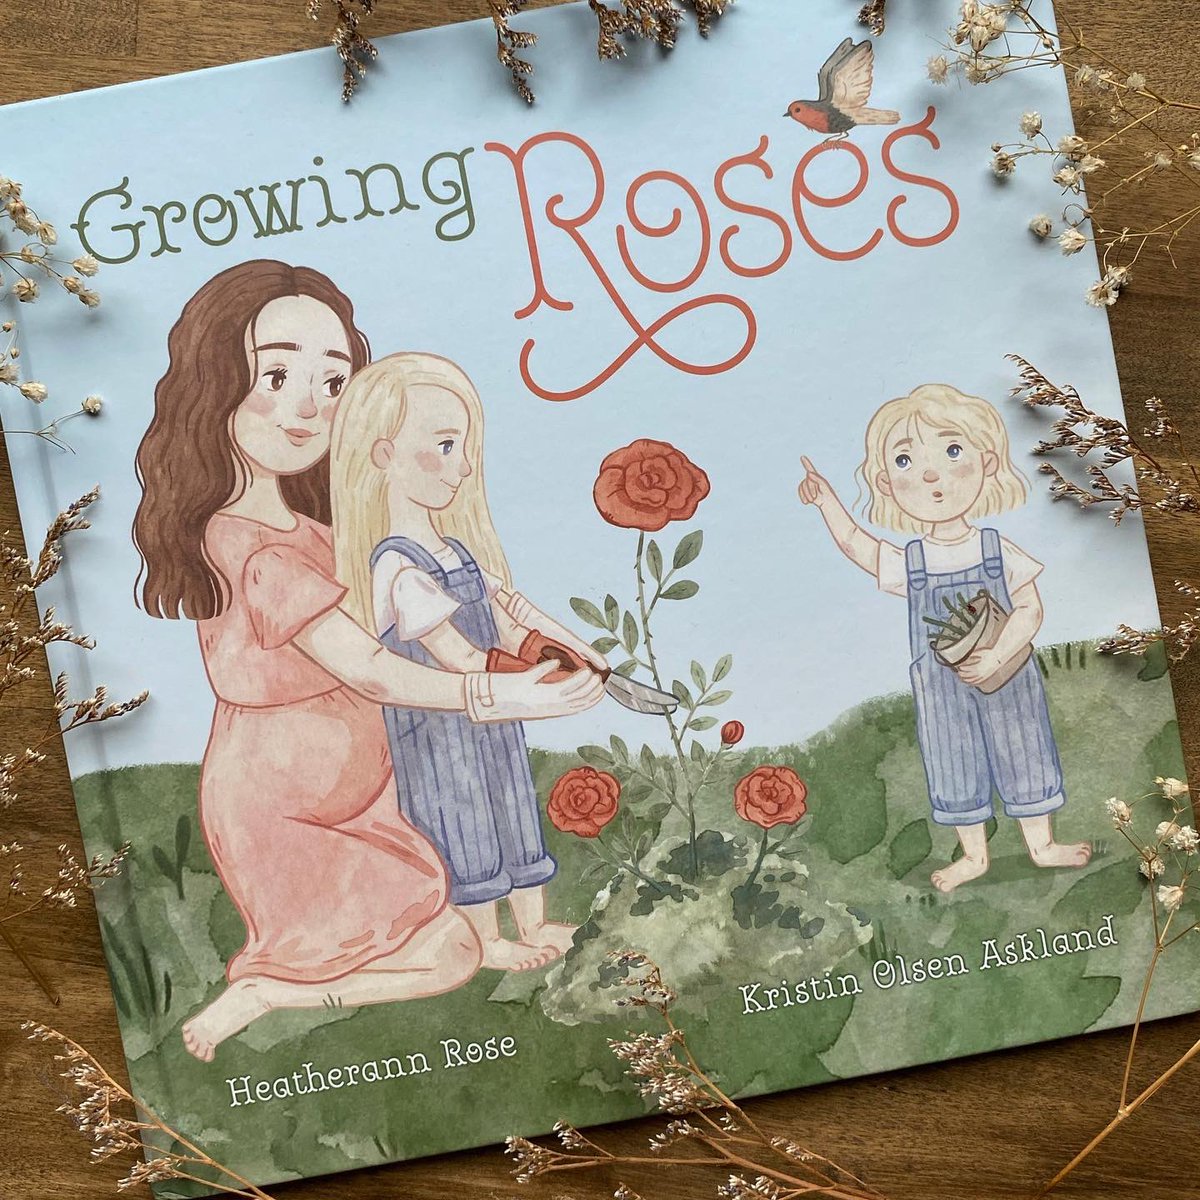 Growing Roses! 
So excited I got to illustrate a full children's book!💛🌱 